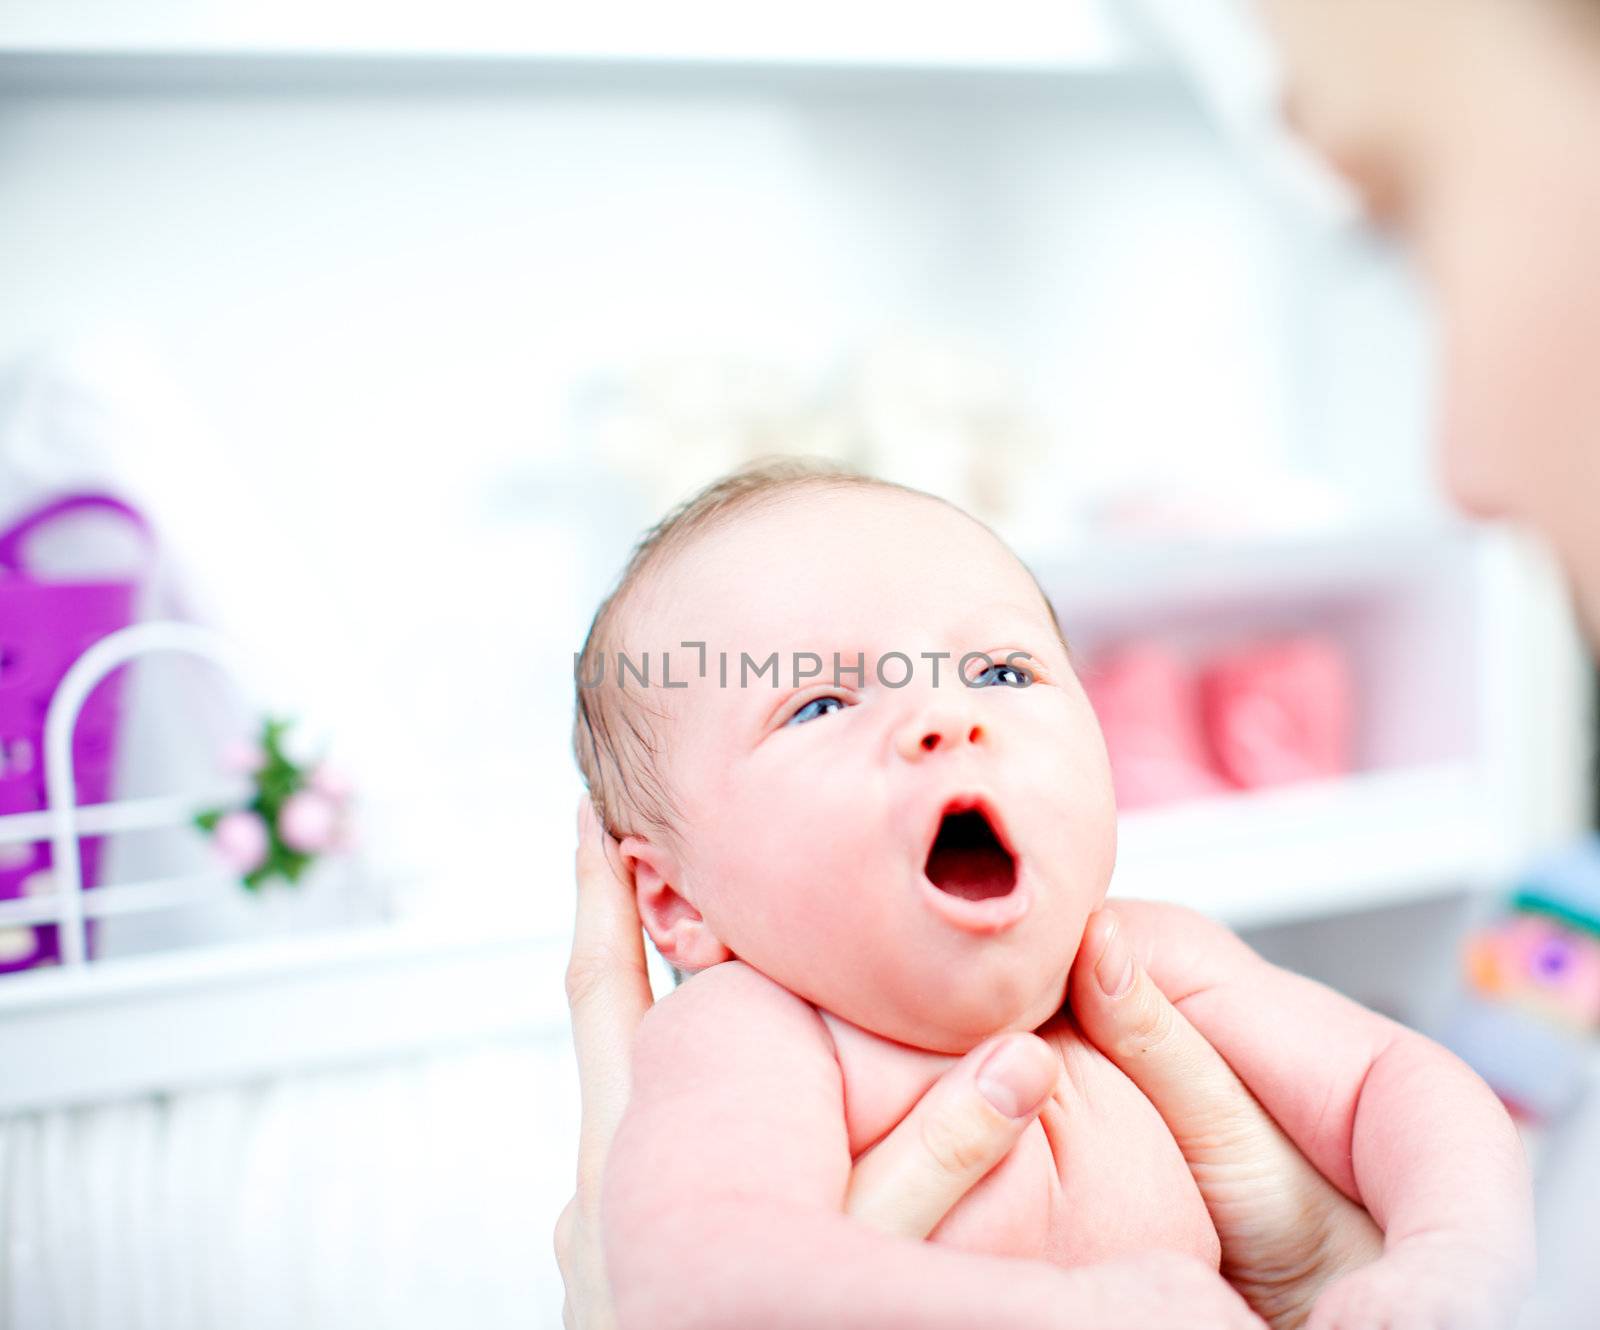 Cute yawning tiny baby being held in its mothers hands as she prepares to dress it in the nursery, closeup of the infants face